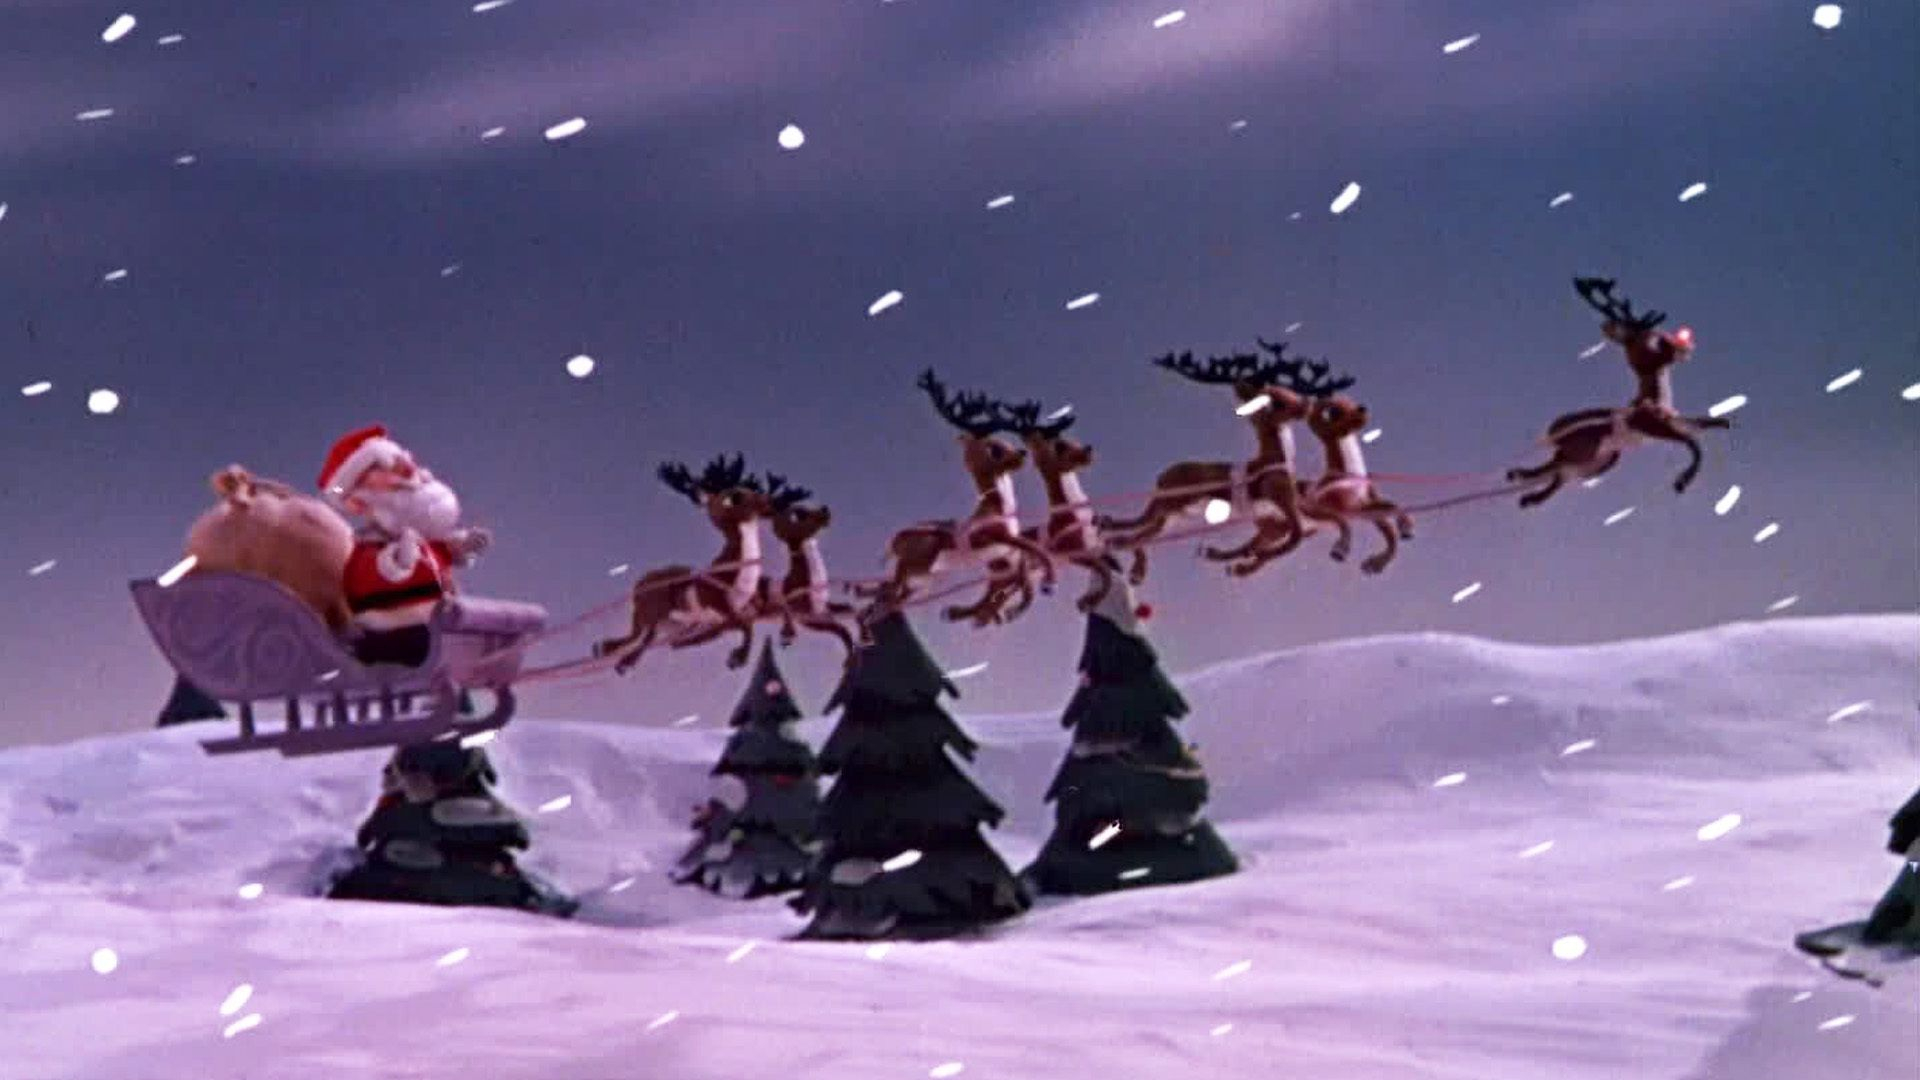 1920x1080 Rudolph Christmas Wallpapers Top Free Rudolph Christmas Backgrounds